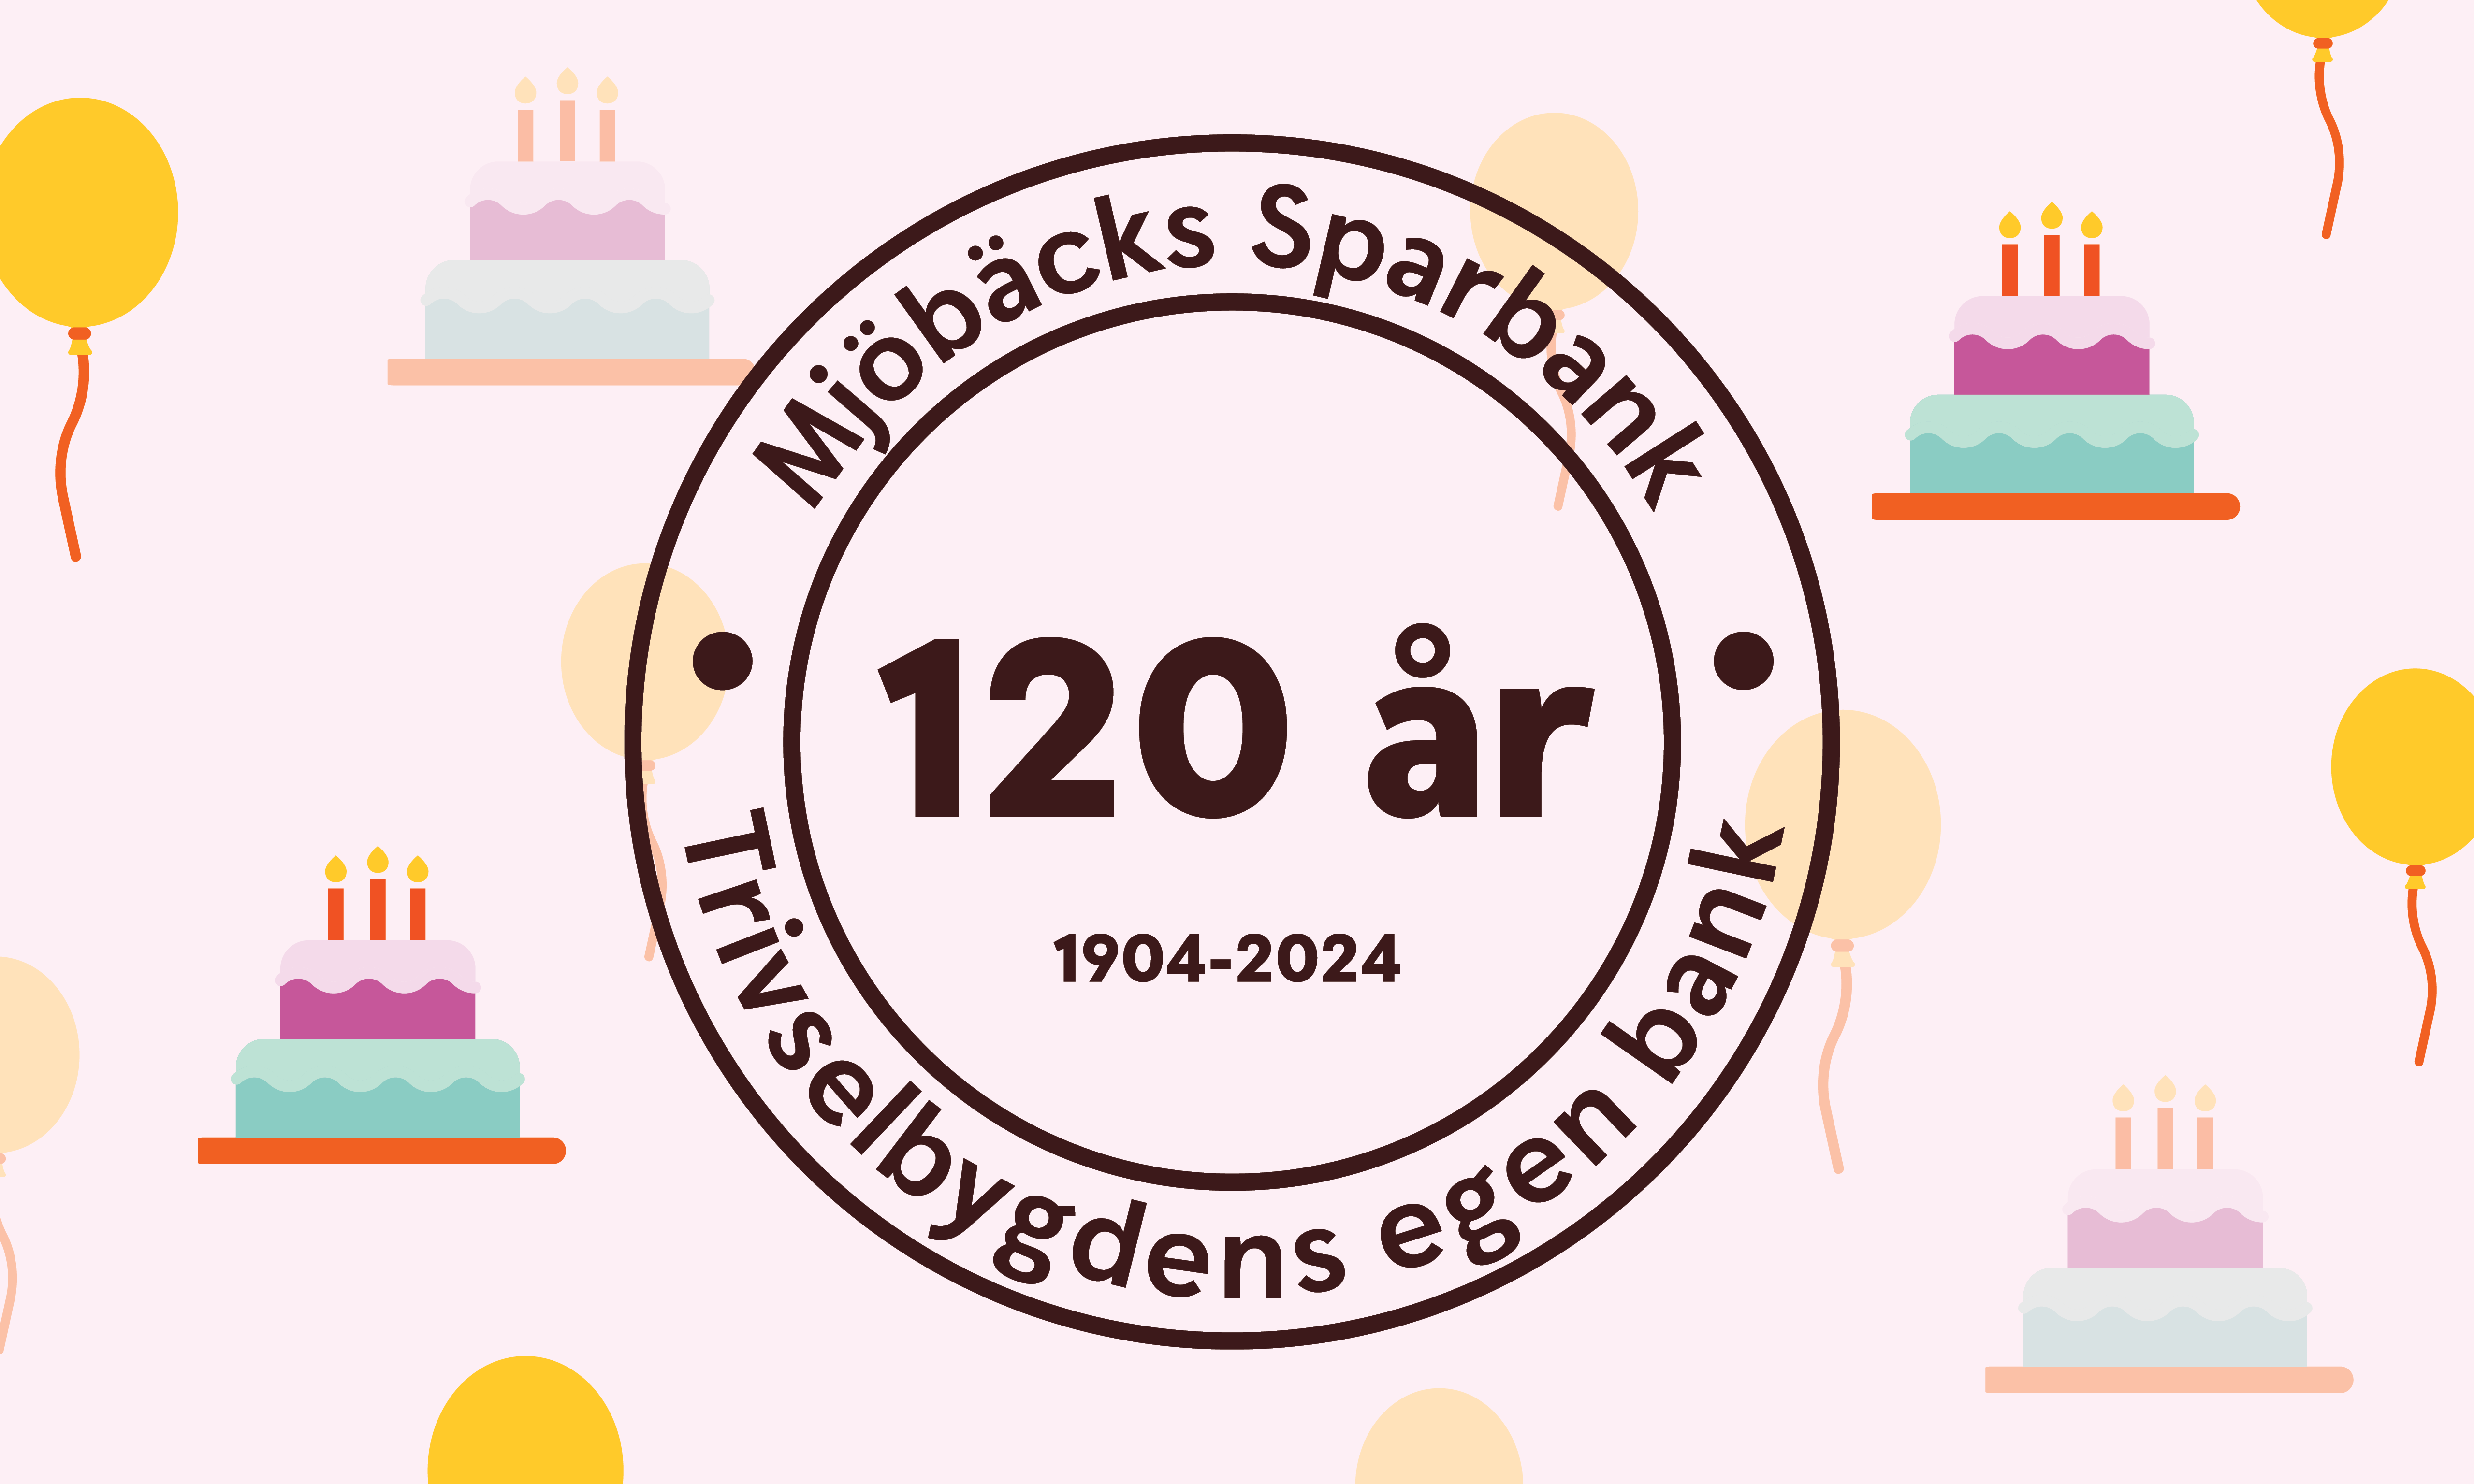 Logo with text: Mjöbäcks Sparbank 120 år 1904-2024 Trivselbygdens egen bank. The logo is surrounded by balloons and cakes.